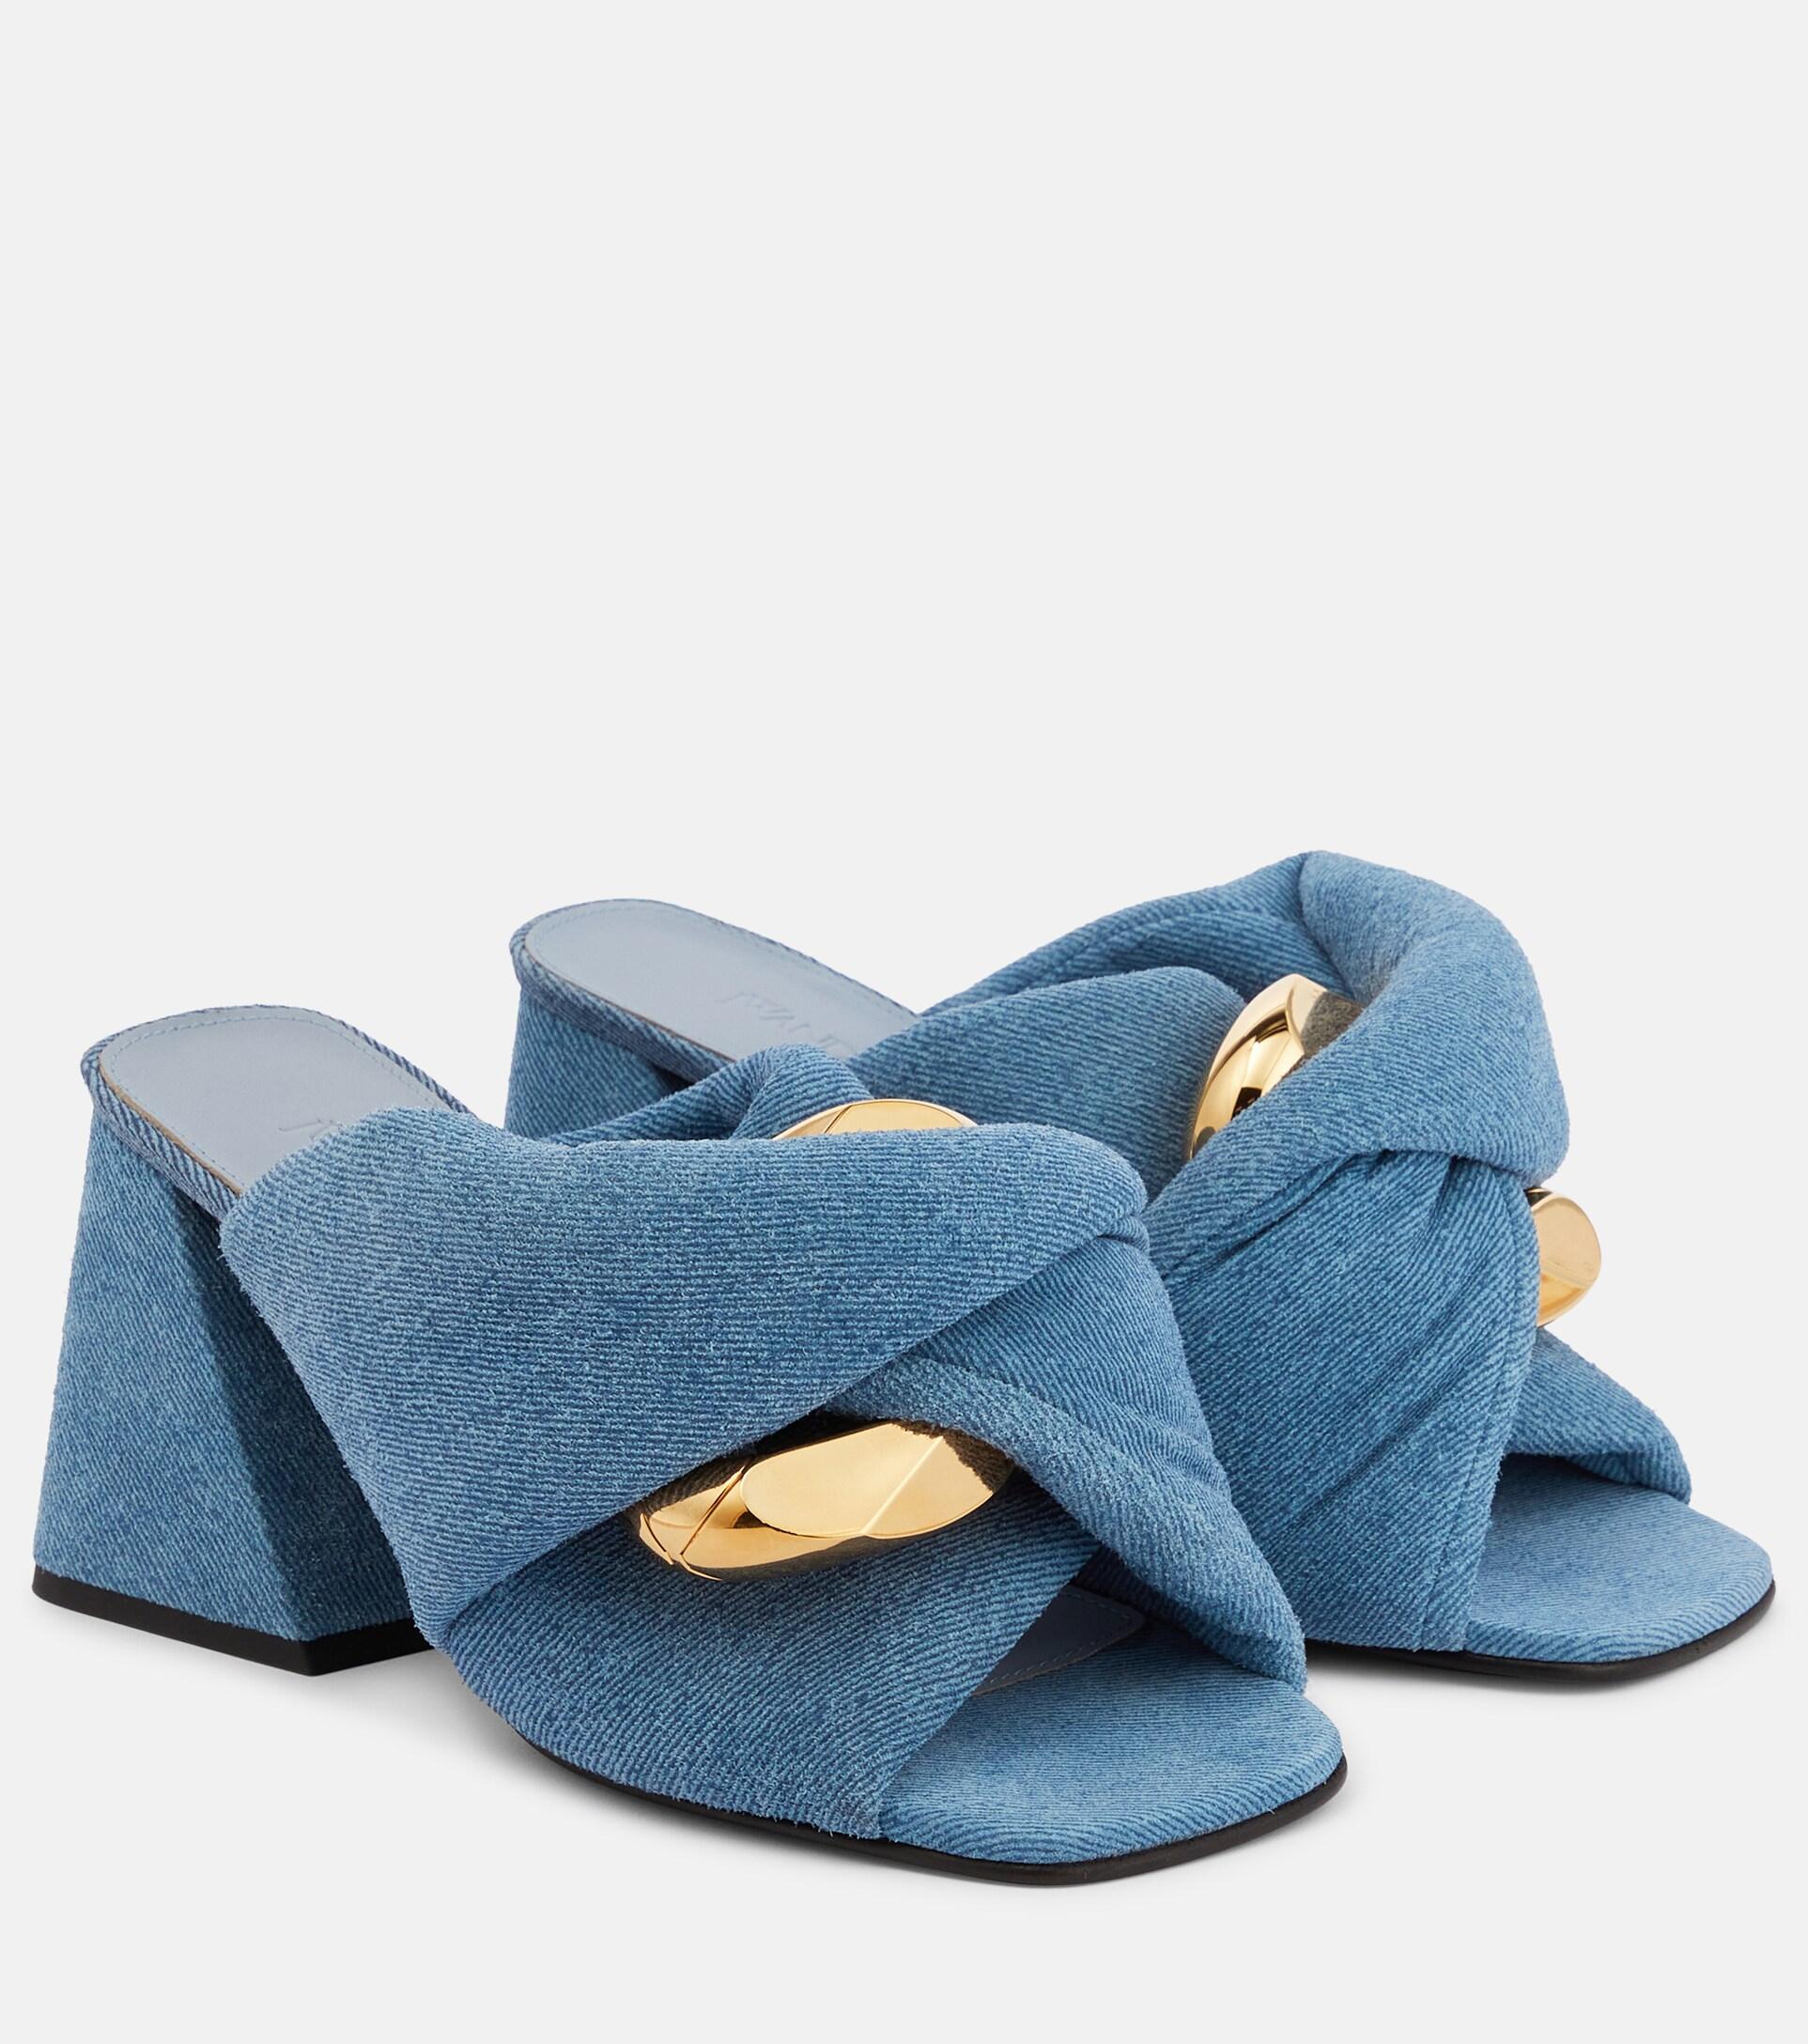 JW Anderson Chain And Twist Denim Mules in Blue | Lyst